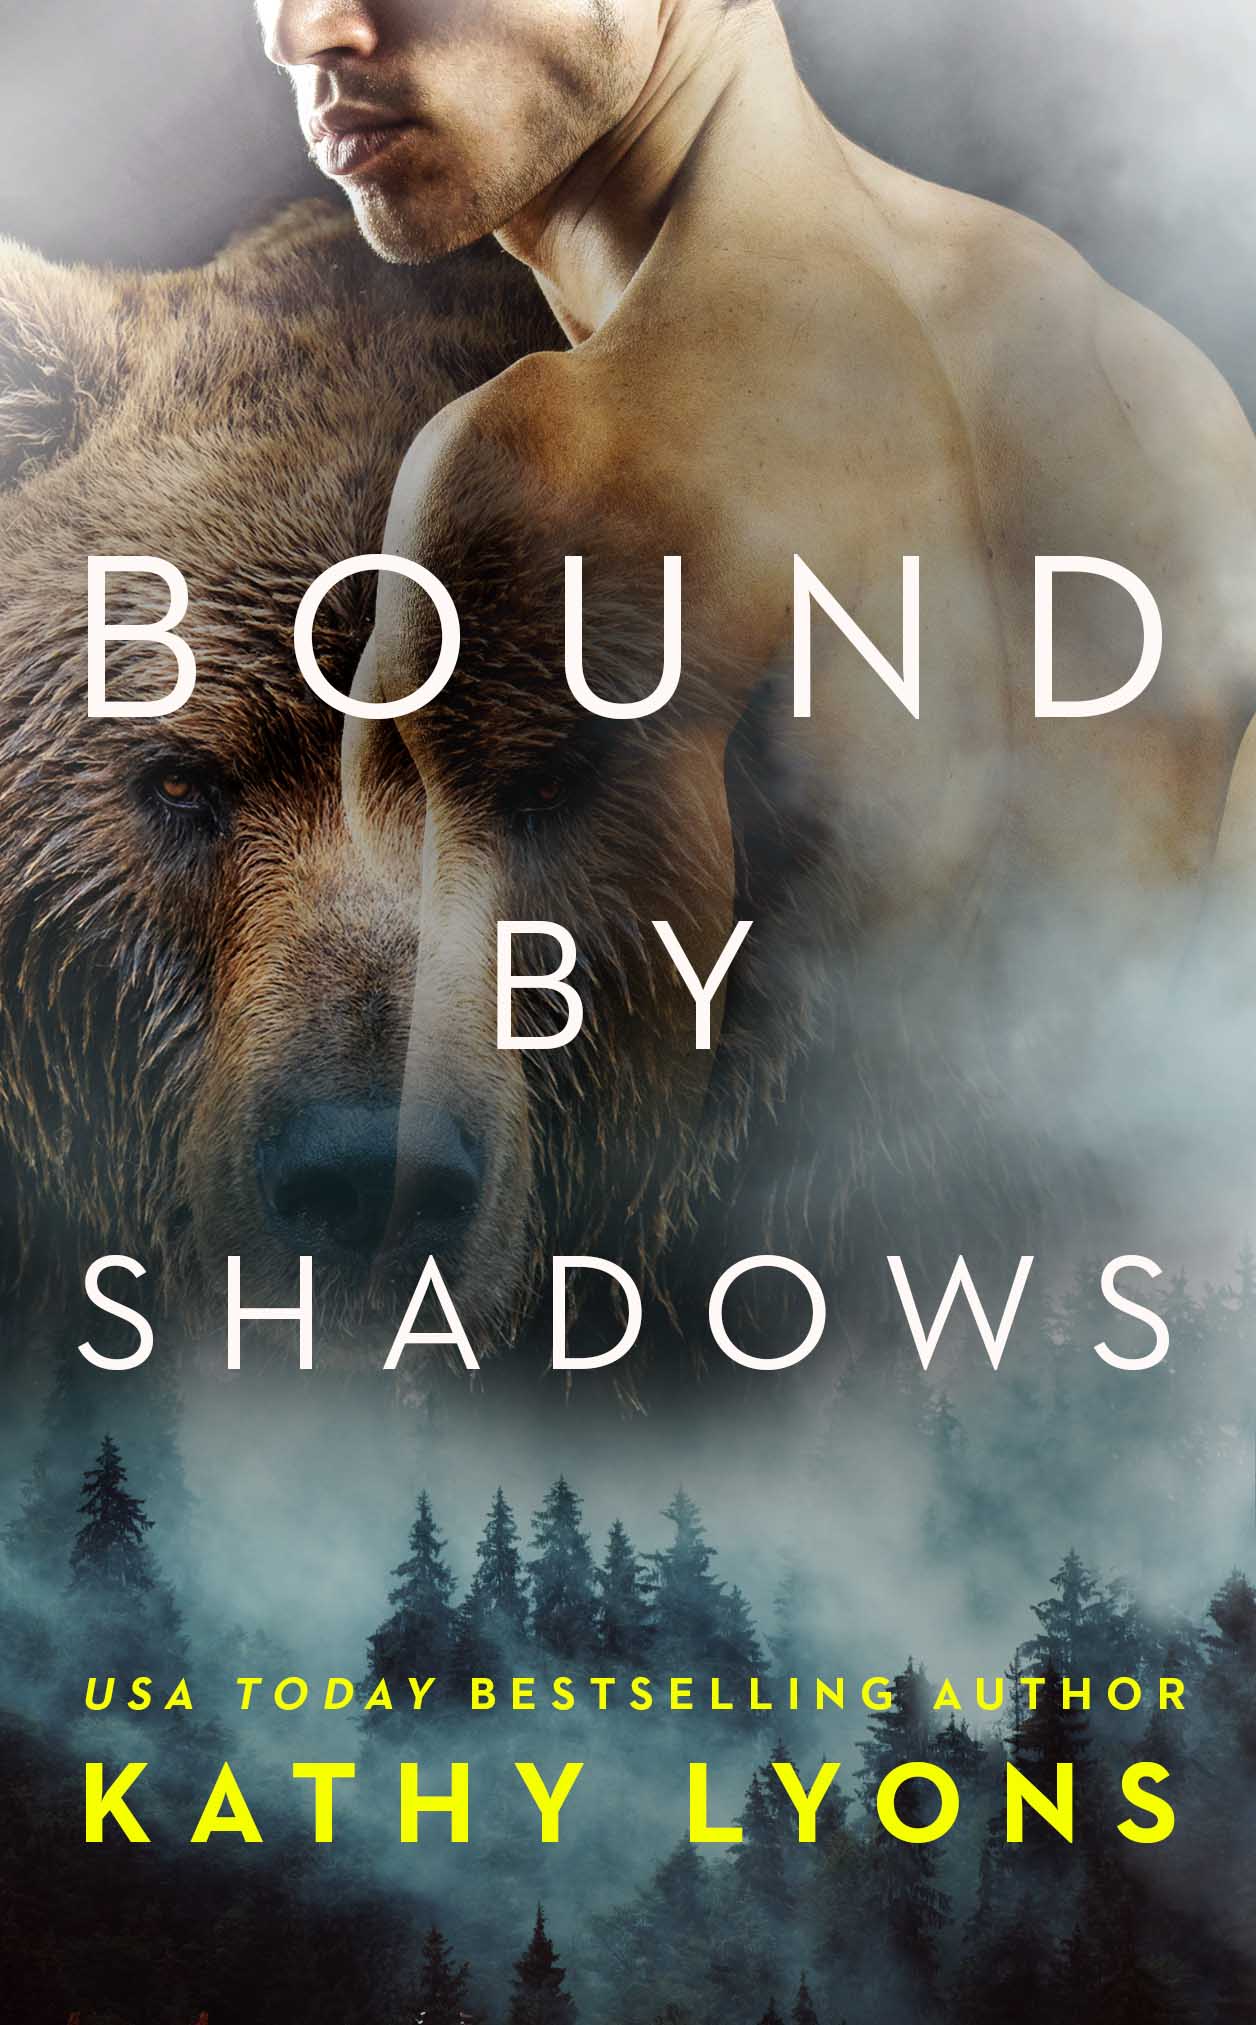 Bound by Shadows by Kathy Lyons